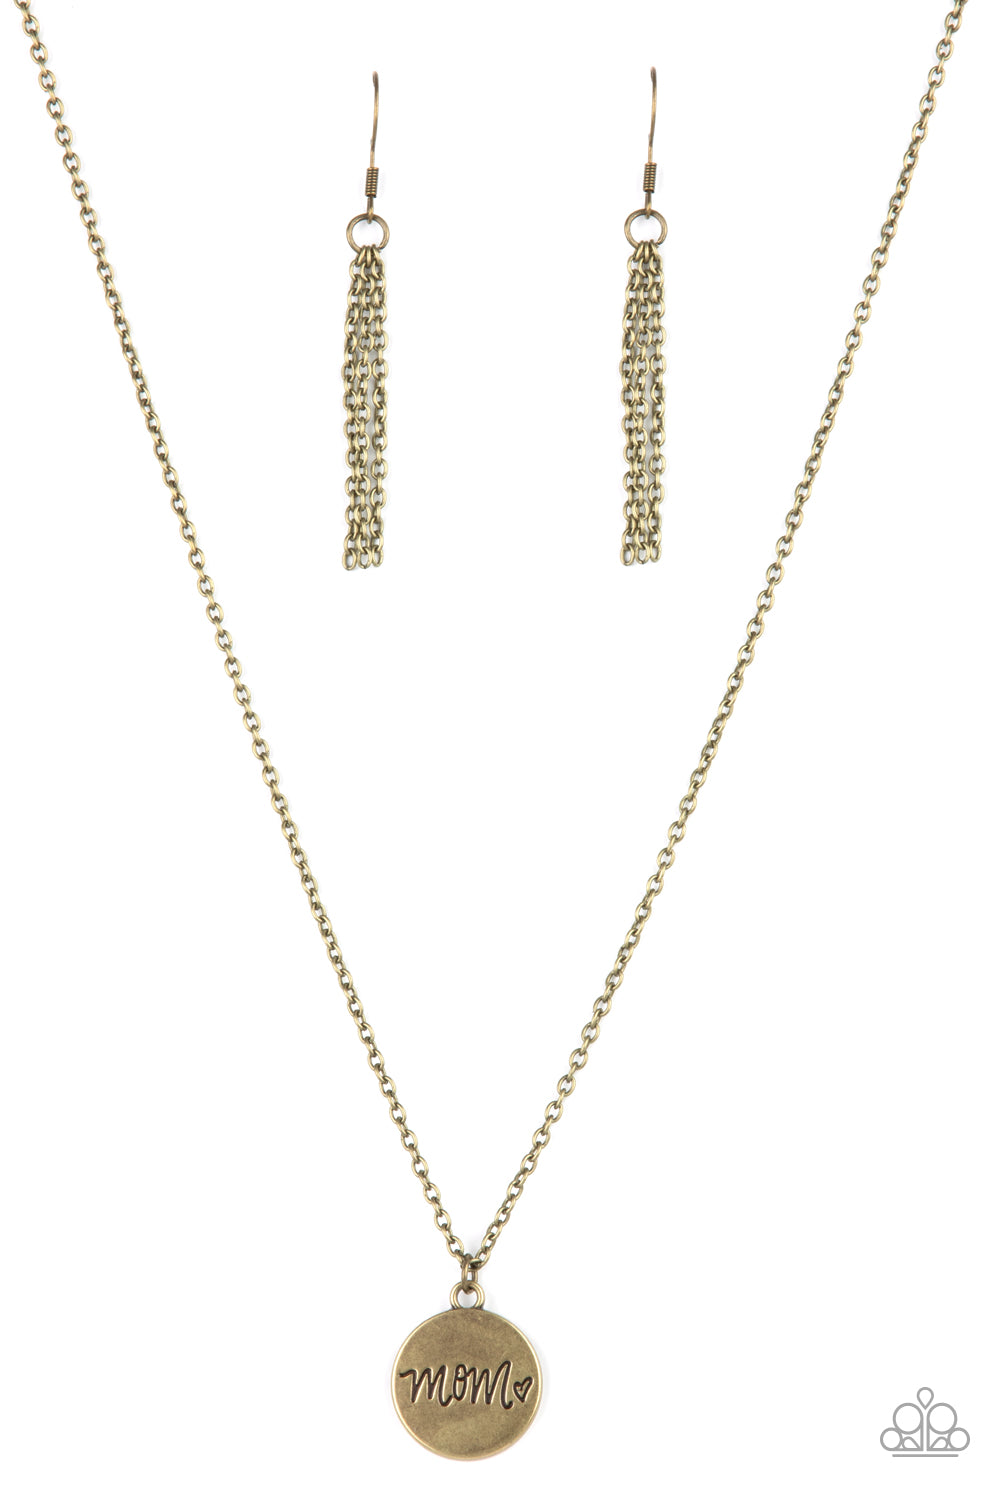 Paparazzi - The Cool Mom - Brass Necklace & Earrings